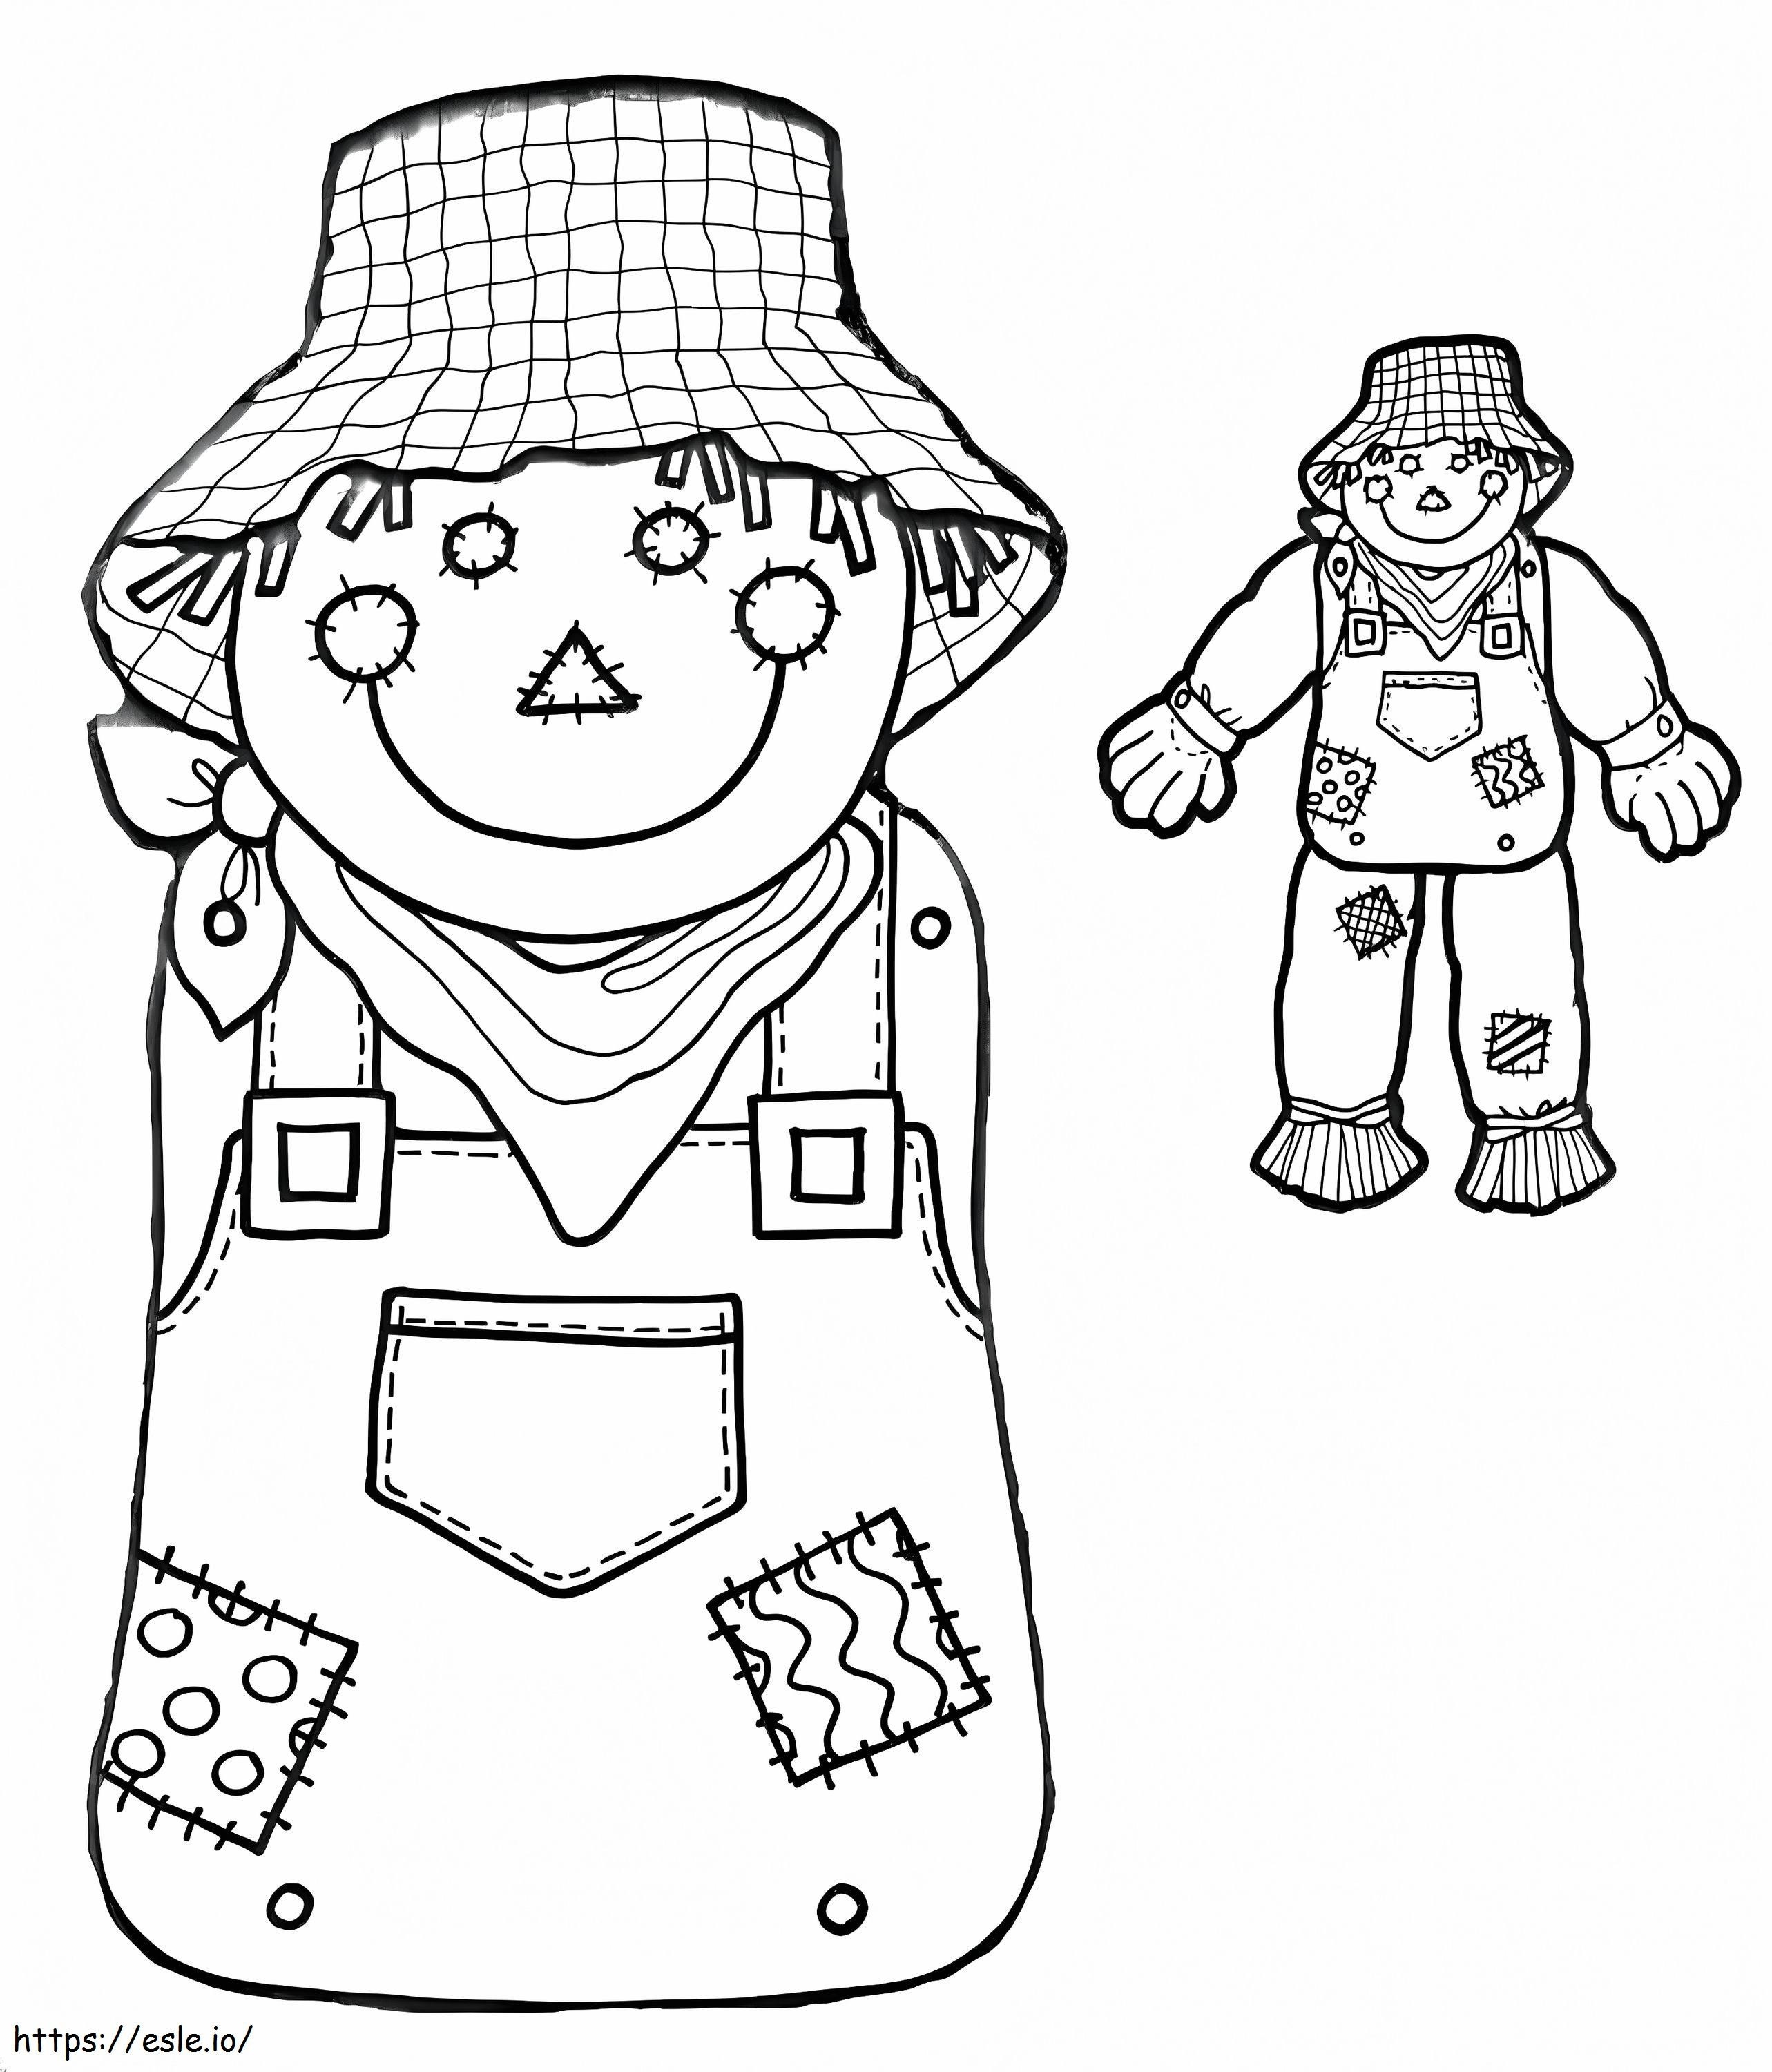 Two Scarecrows coloring page